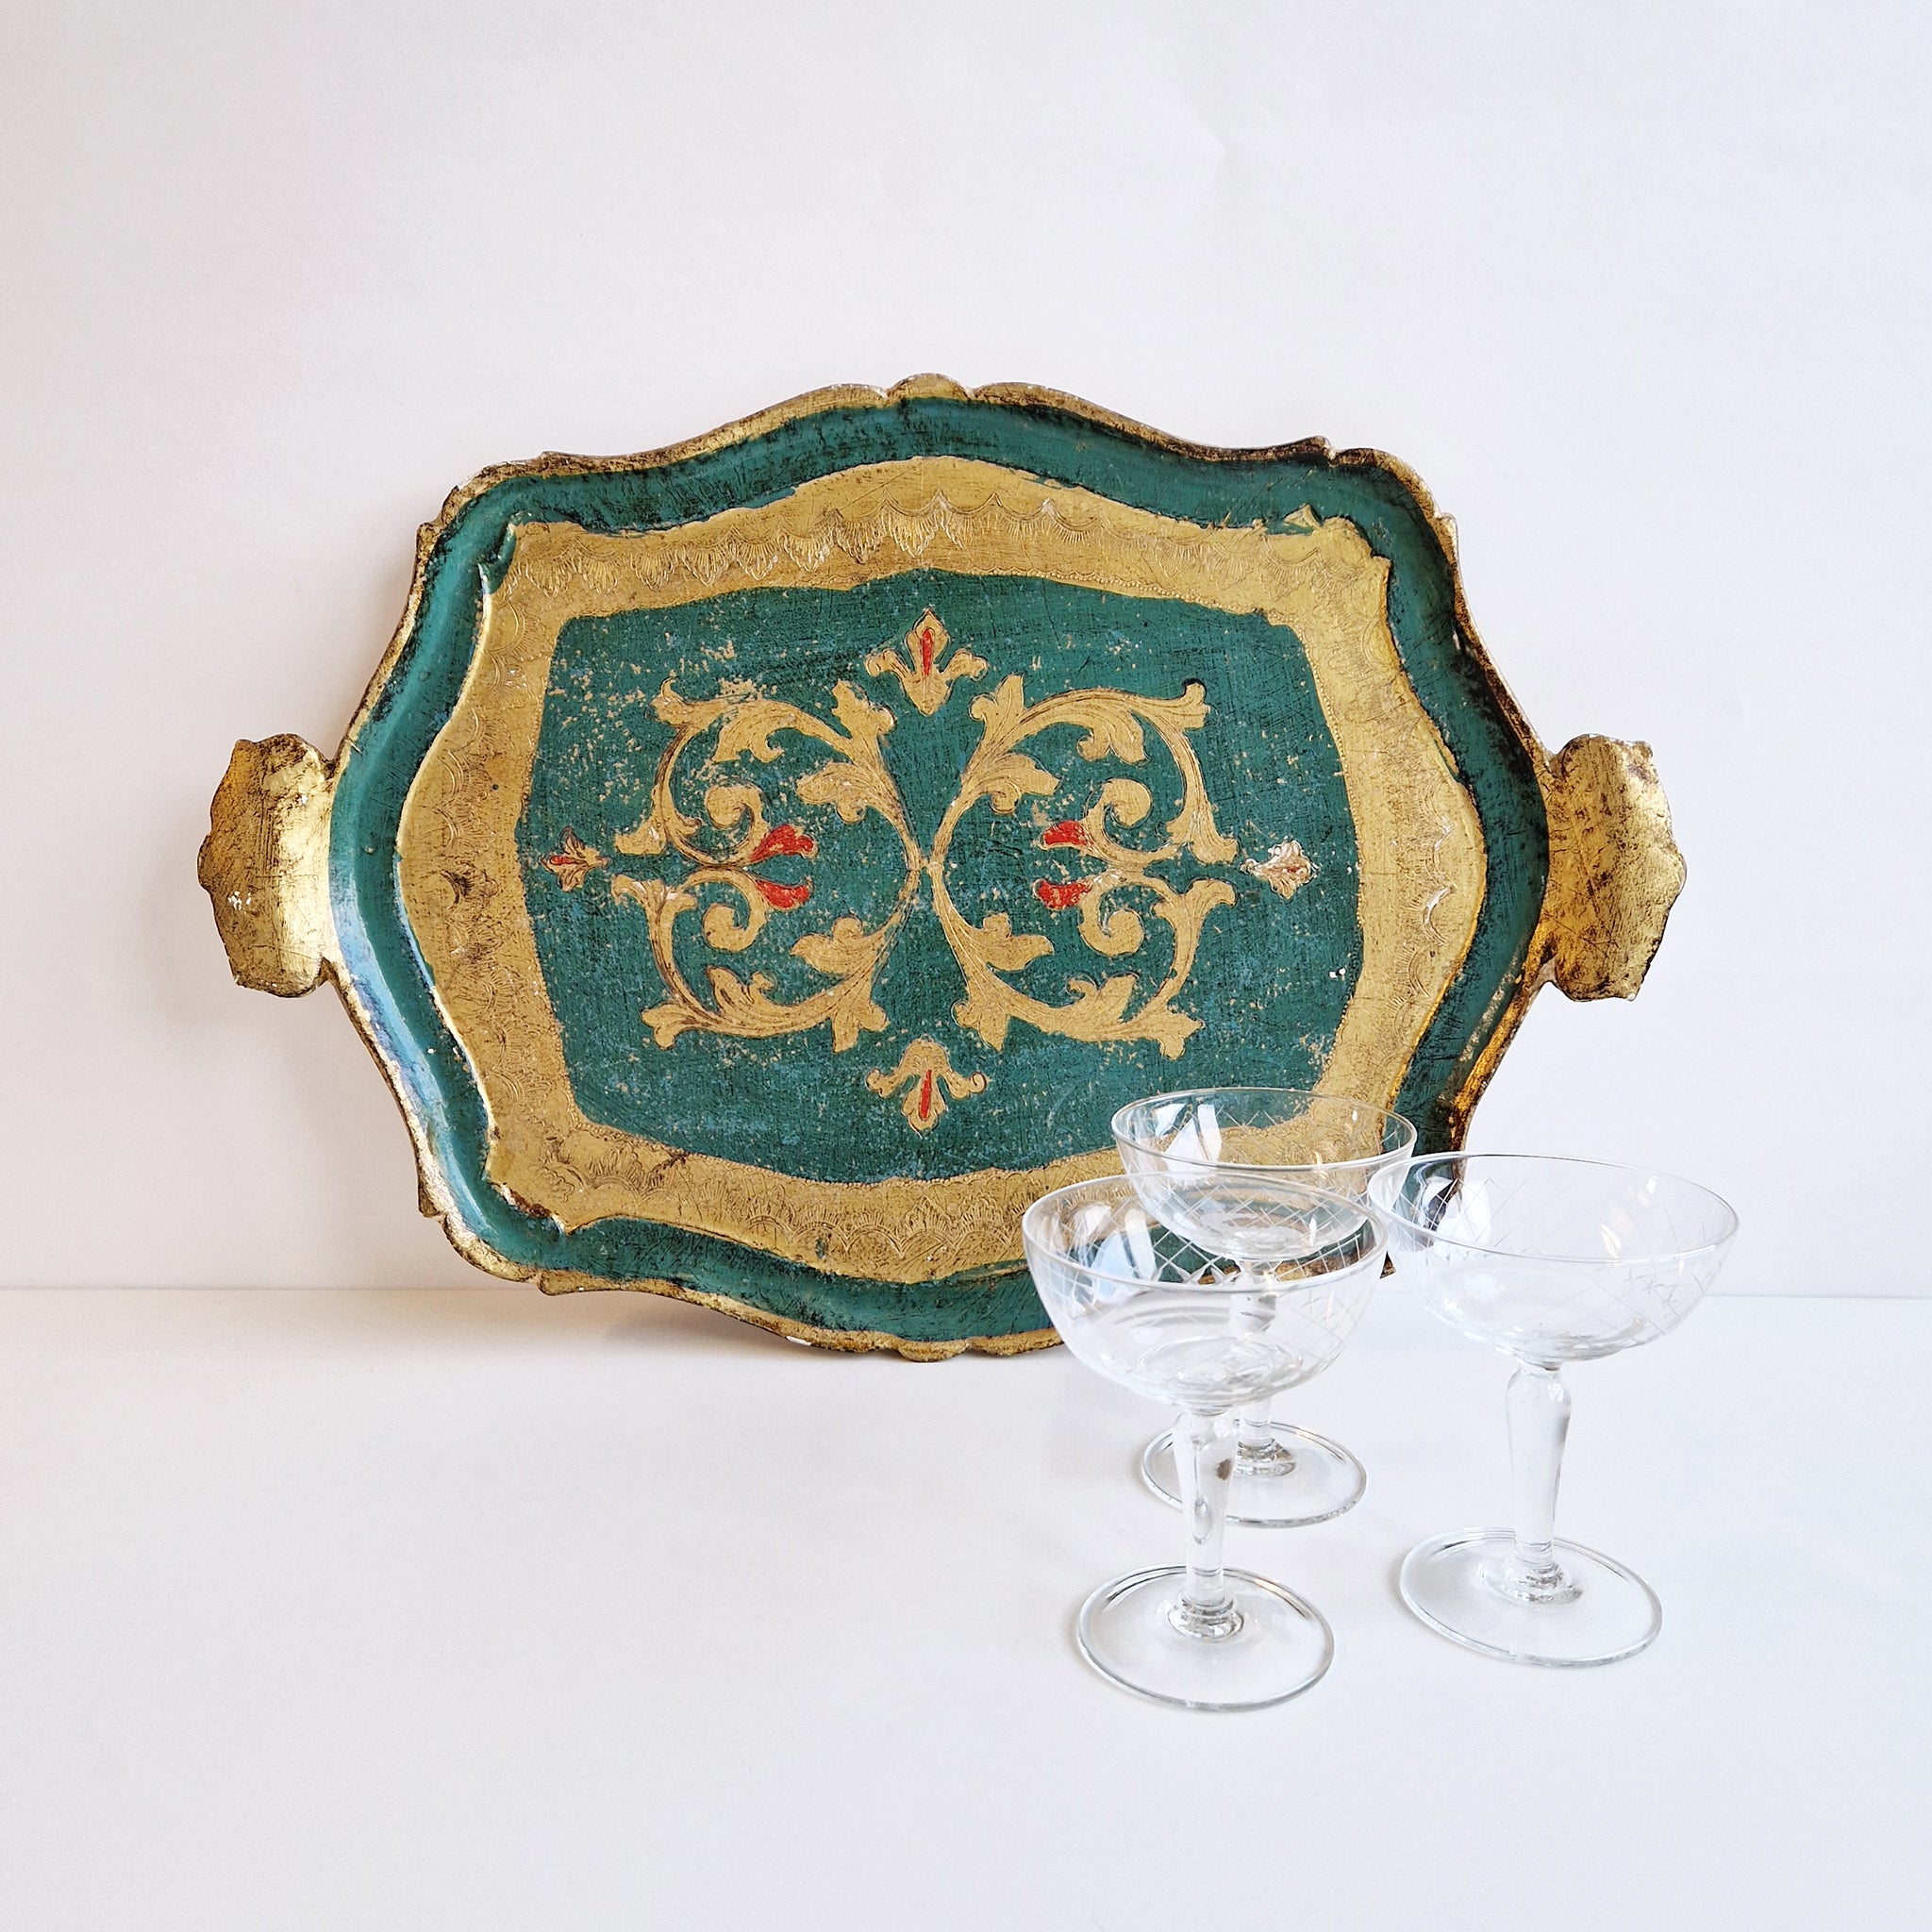 Vintage Florentine-style painted tray